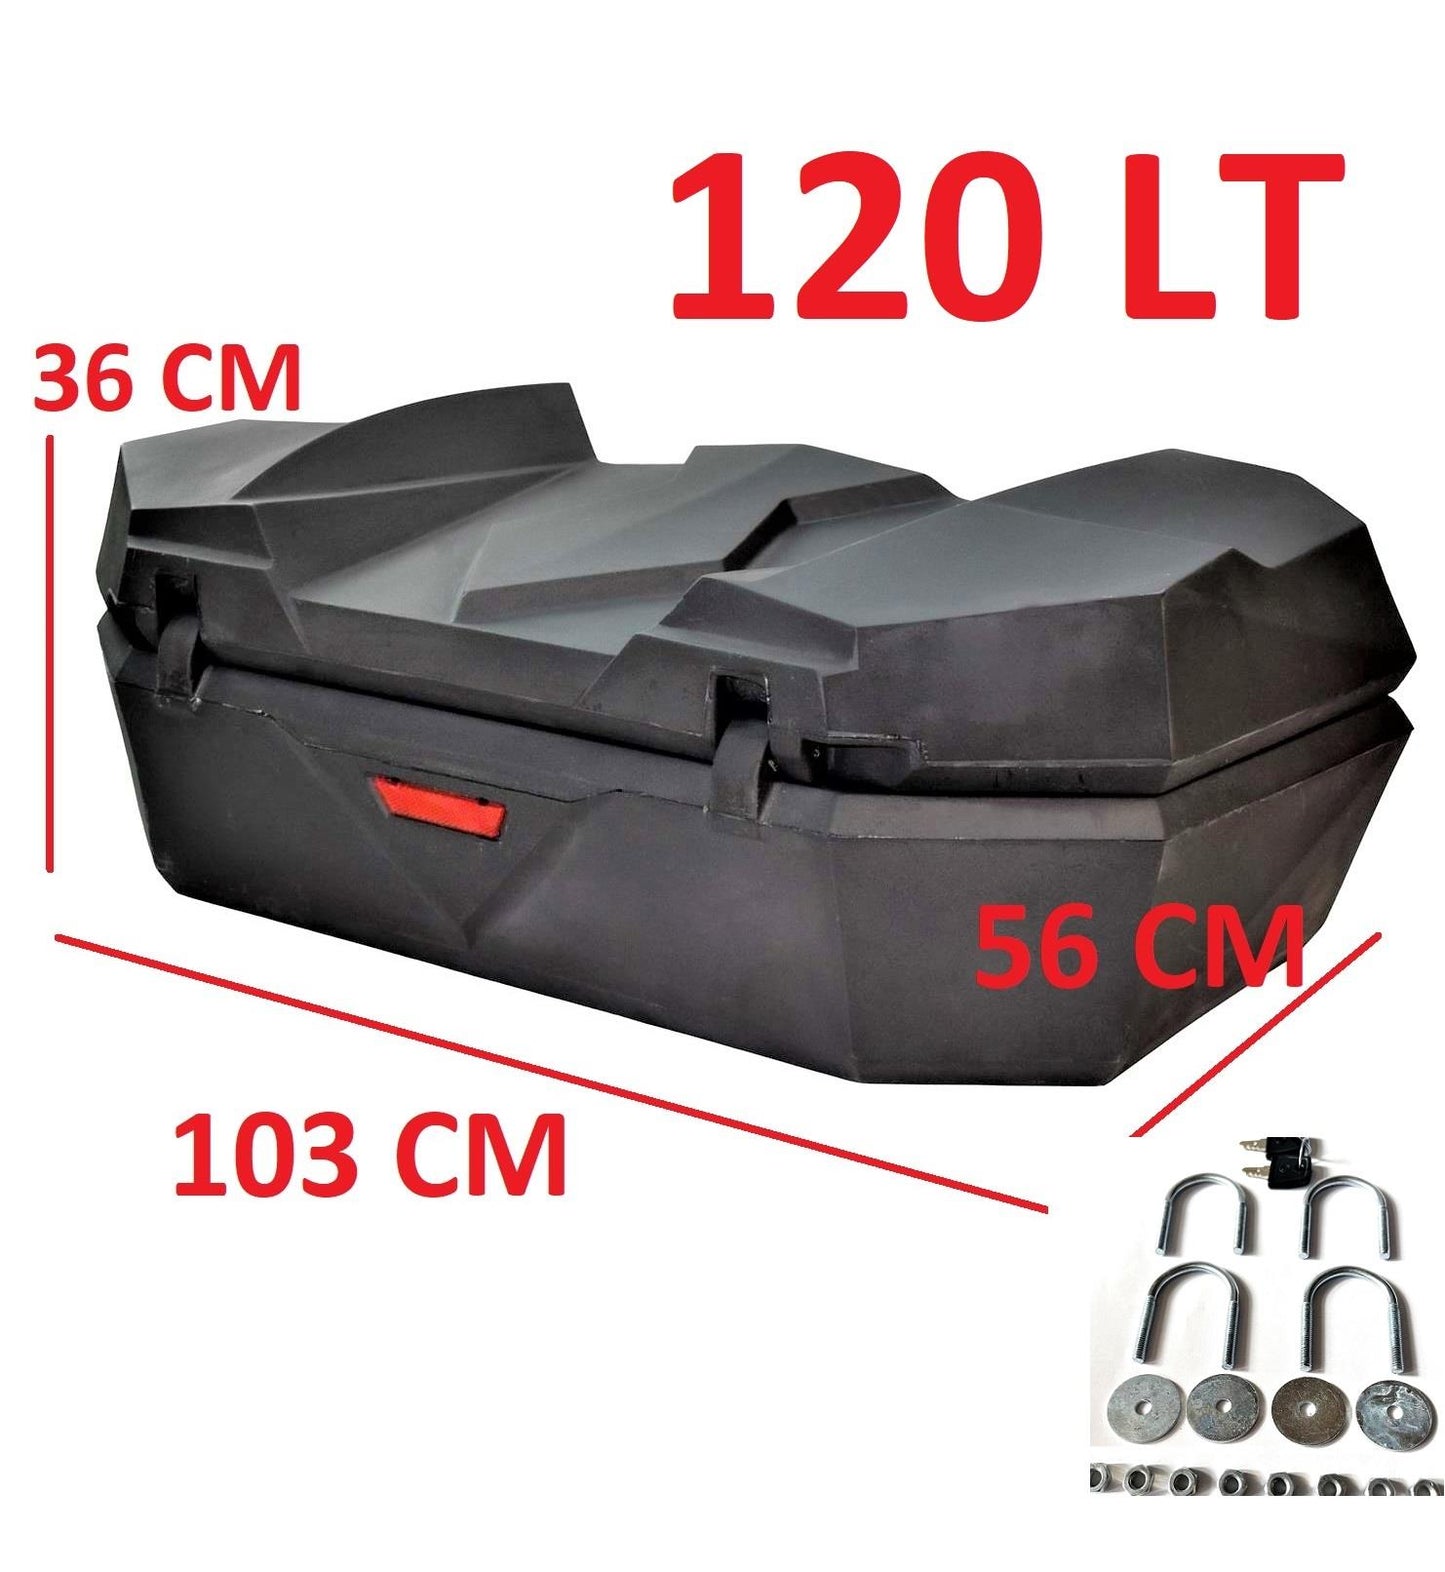 QUAD ATV CARGO BOXES' REAR AND FRONT TRUNKS PAIR X2 BOX